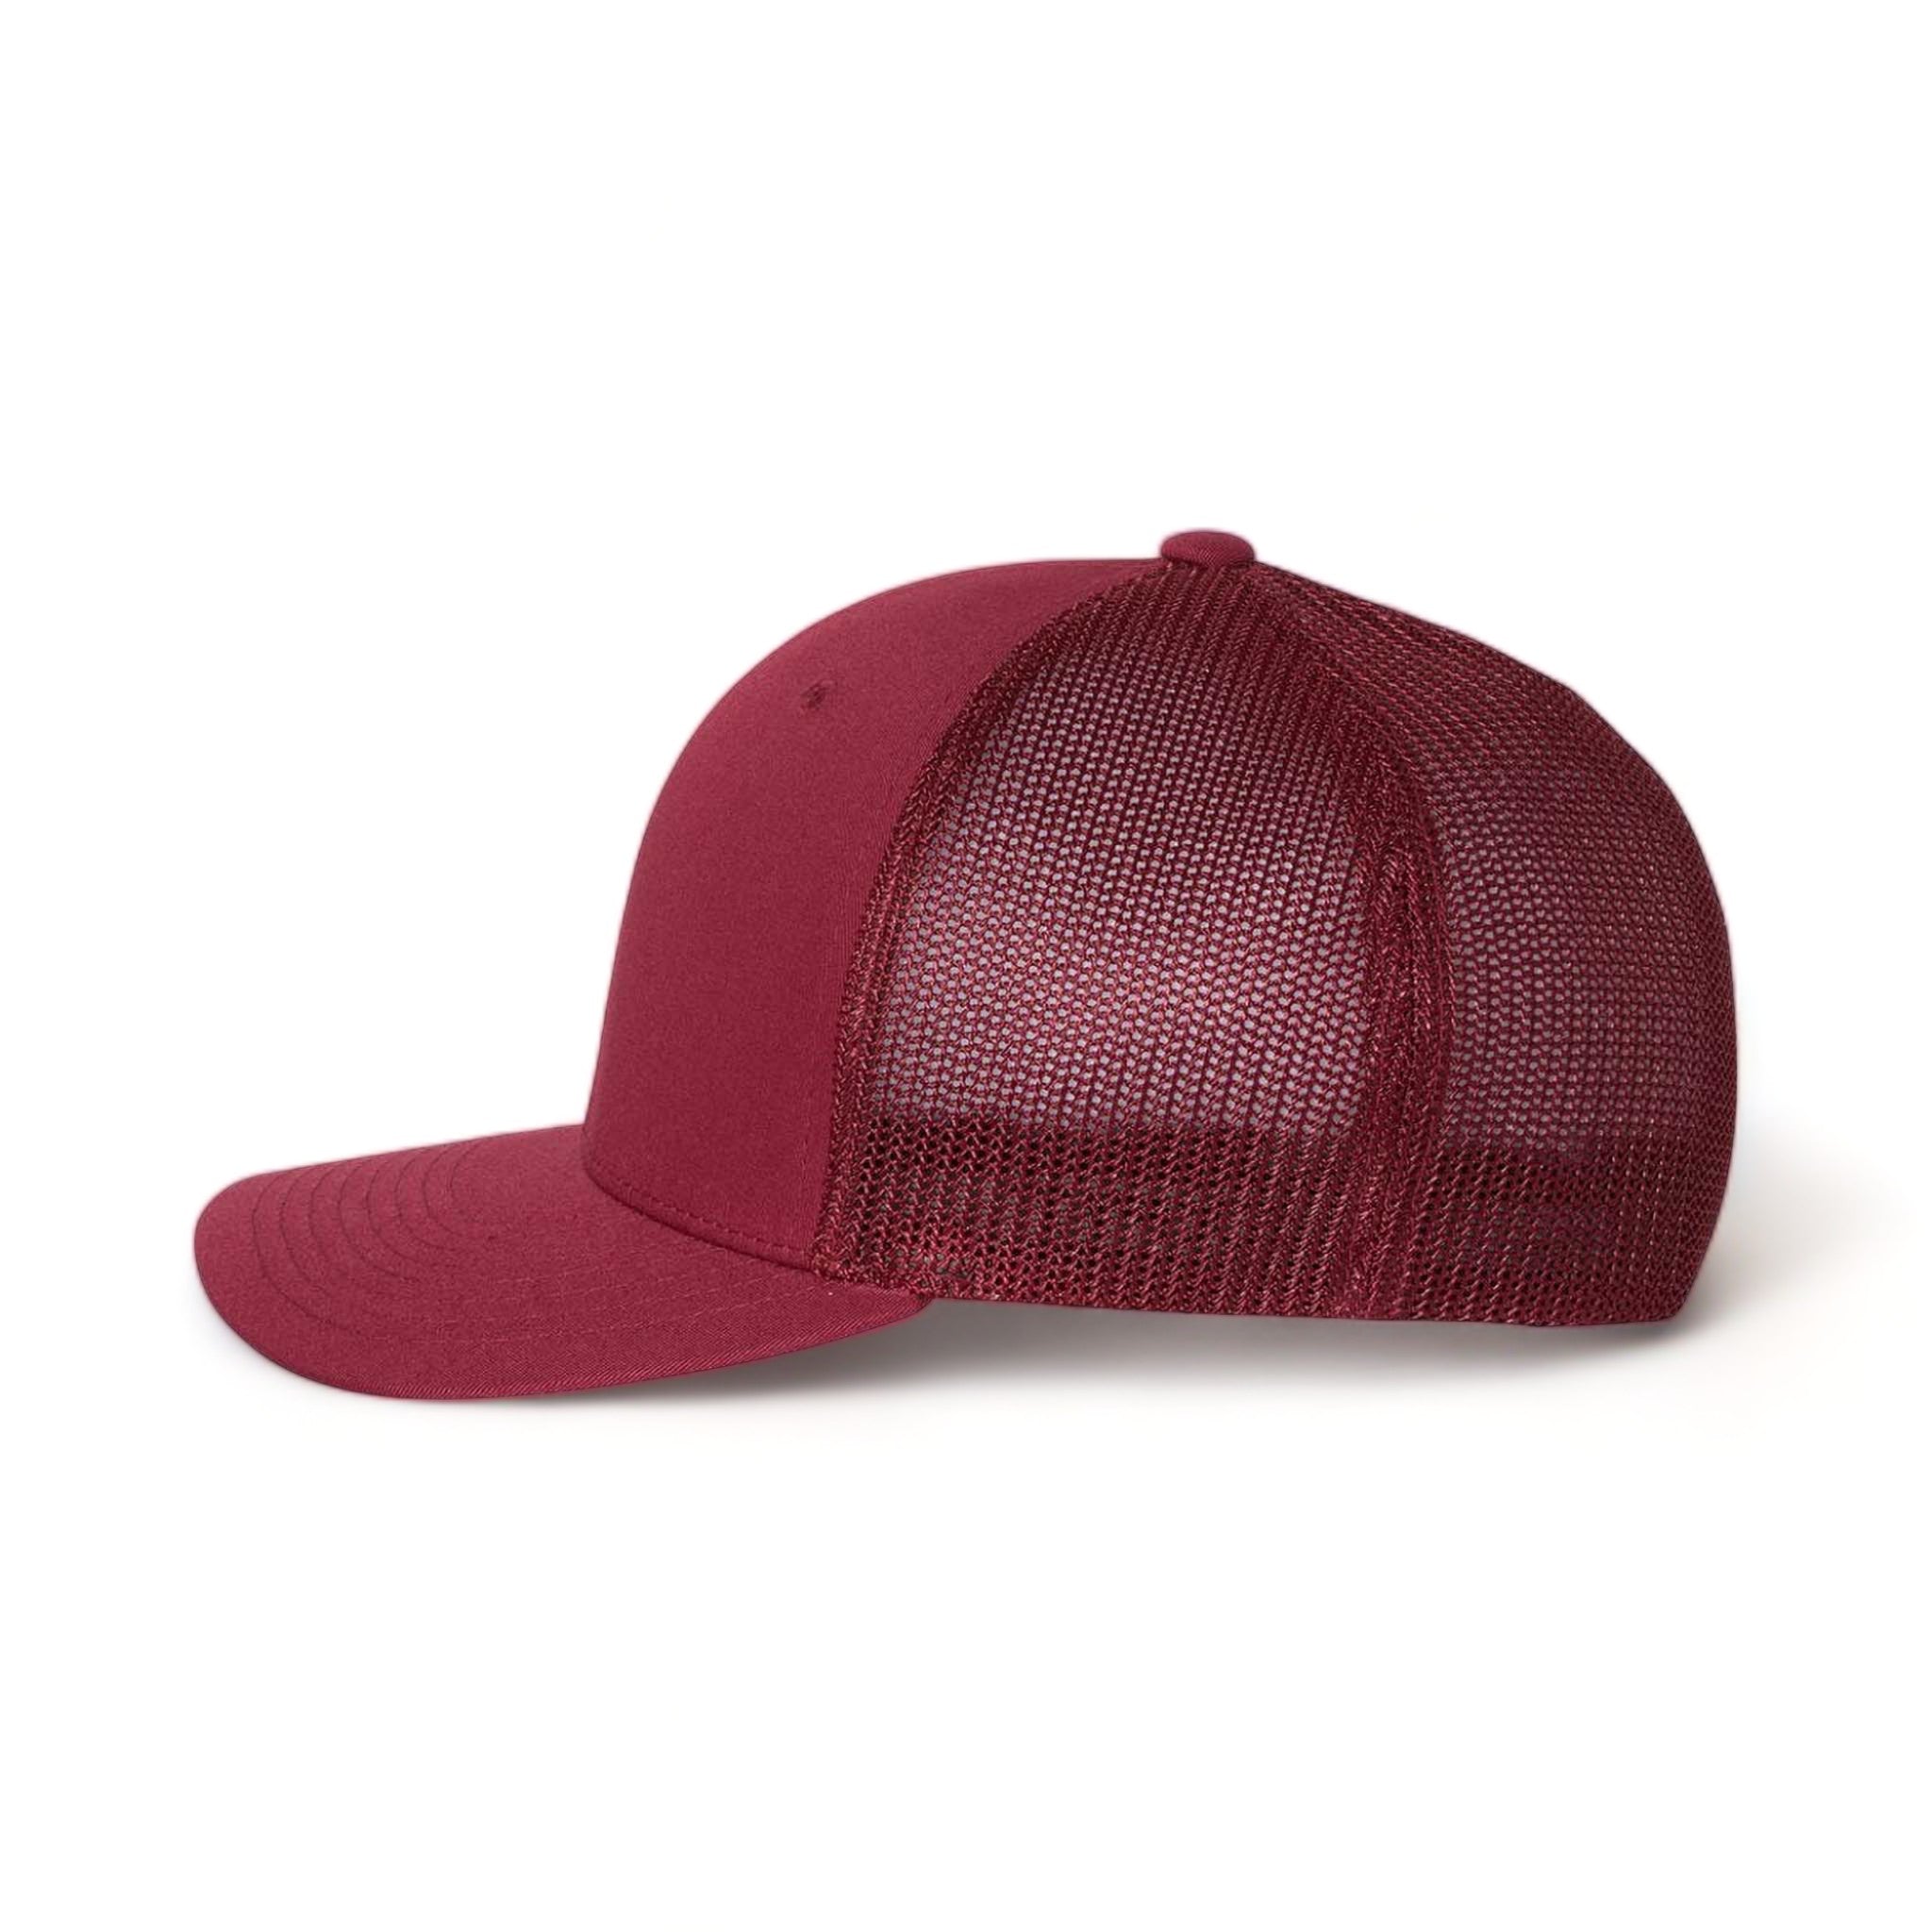 Side view of Flexfit 6511 custom hat in cranberry